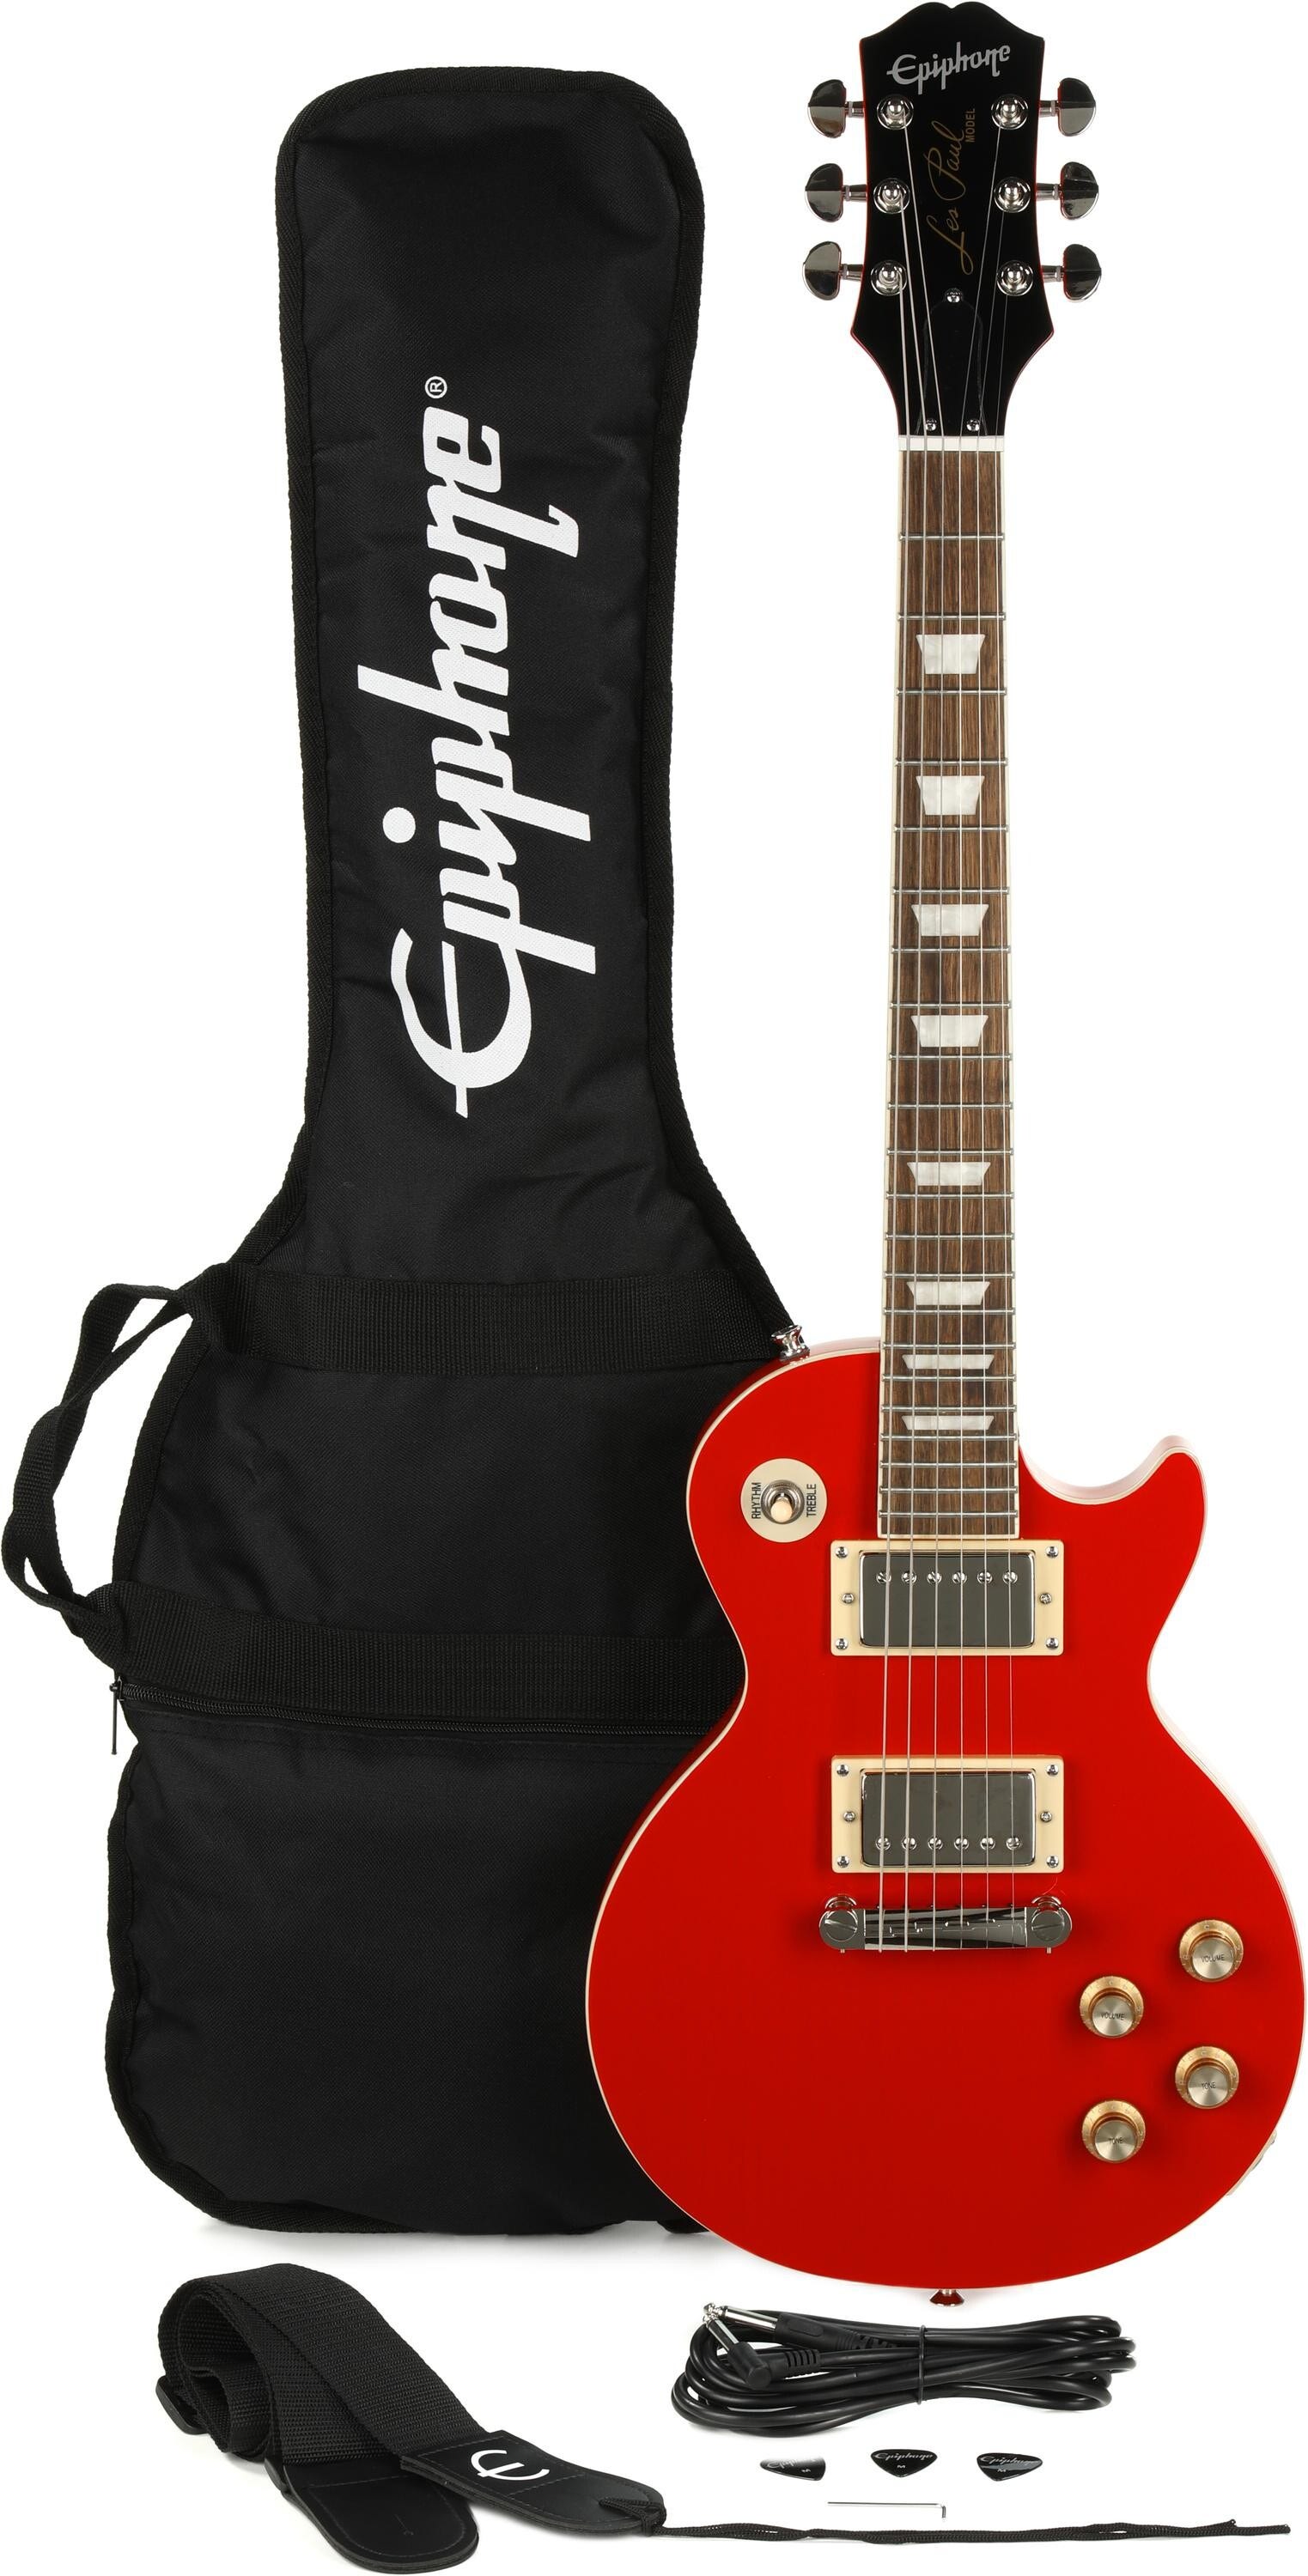 Epiphone Power Players Les Paul Electric Guitar - Lava Red